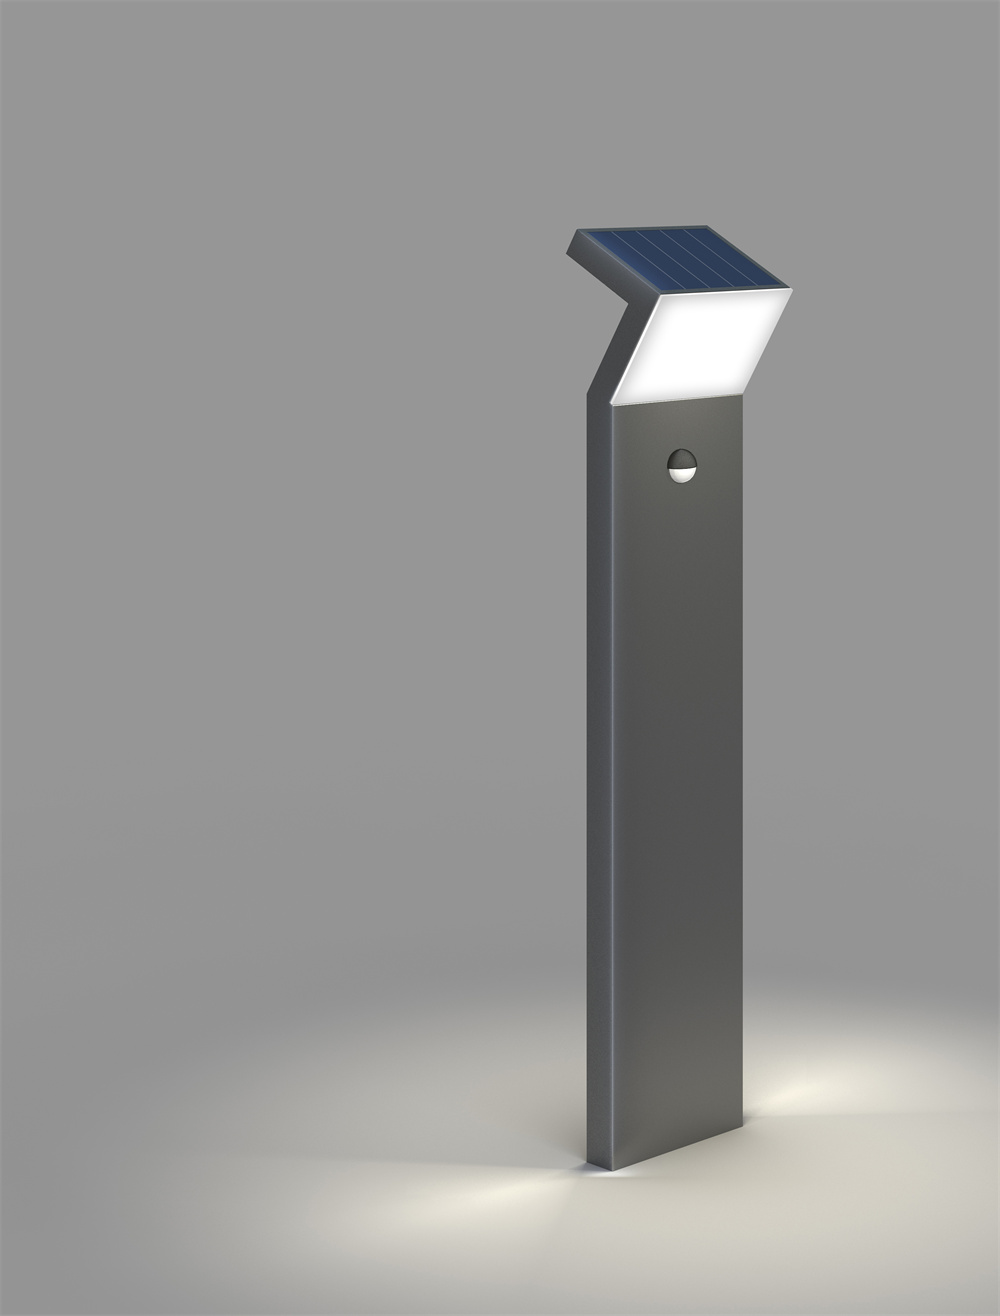 Commercial solar lighting for parking lots